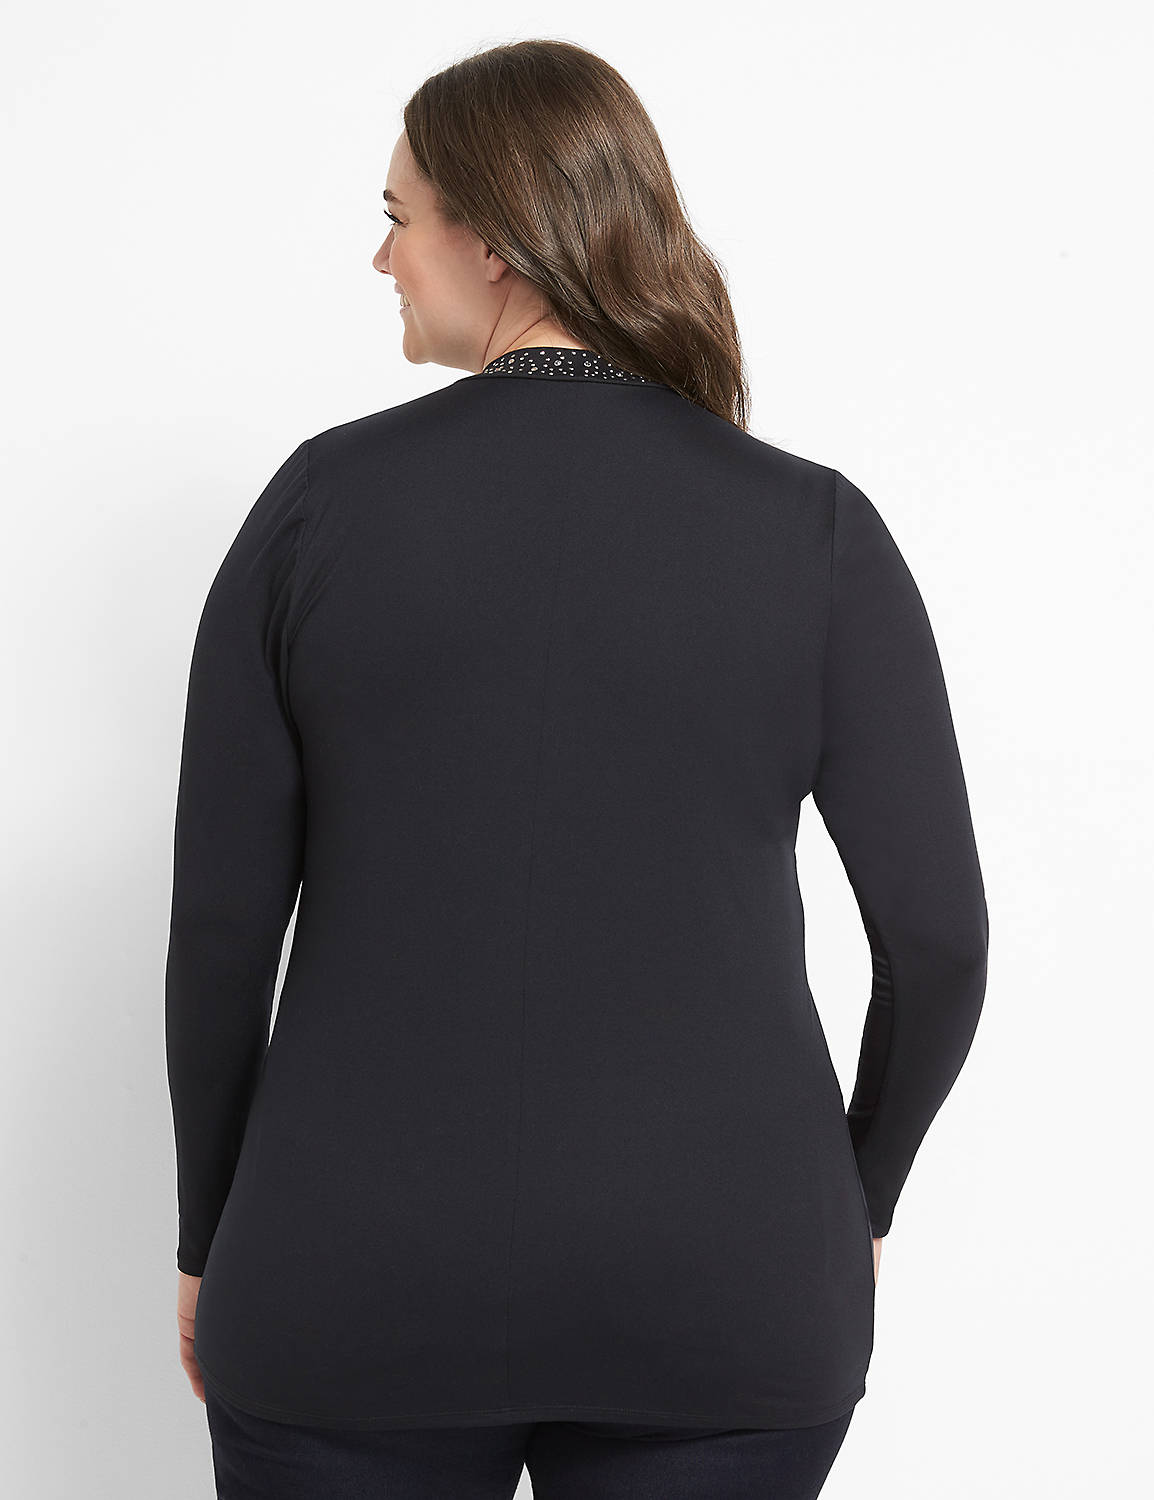 Long Sleeve Mock Neck Tee With Crystal And Studs Embellishments 1123623:Ascena Black:10/12 Product Image 2